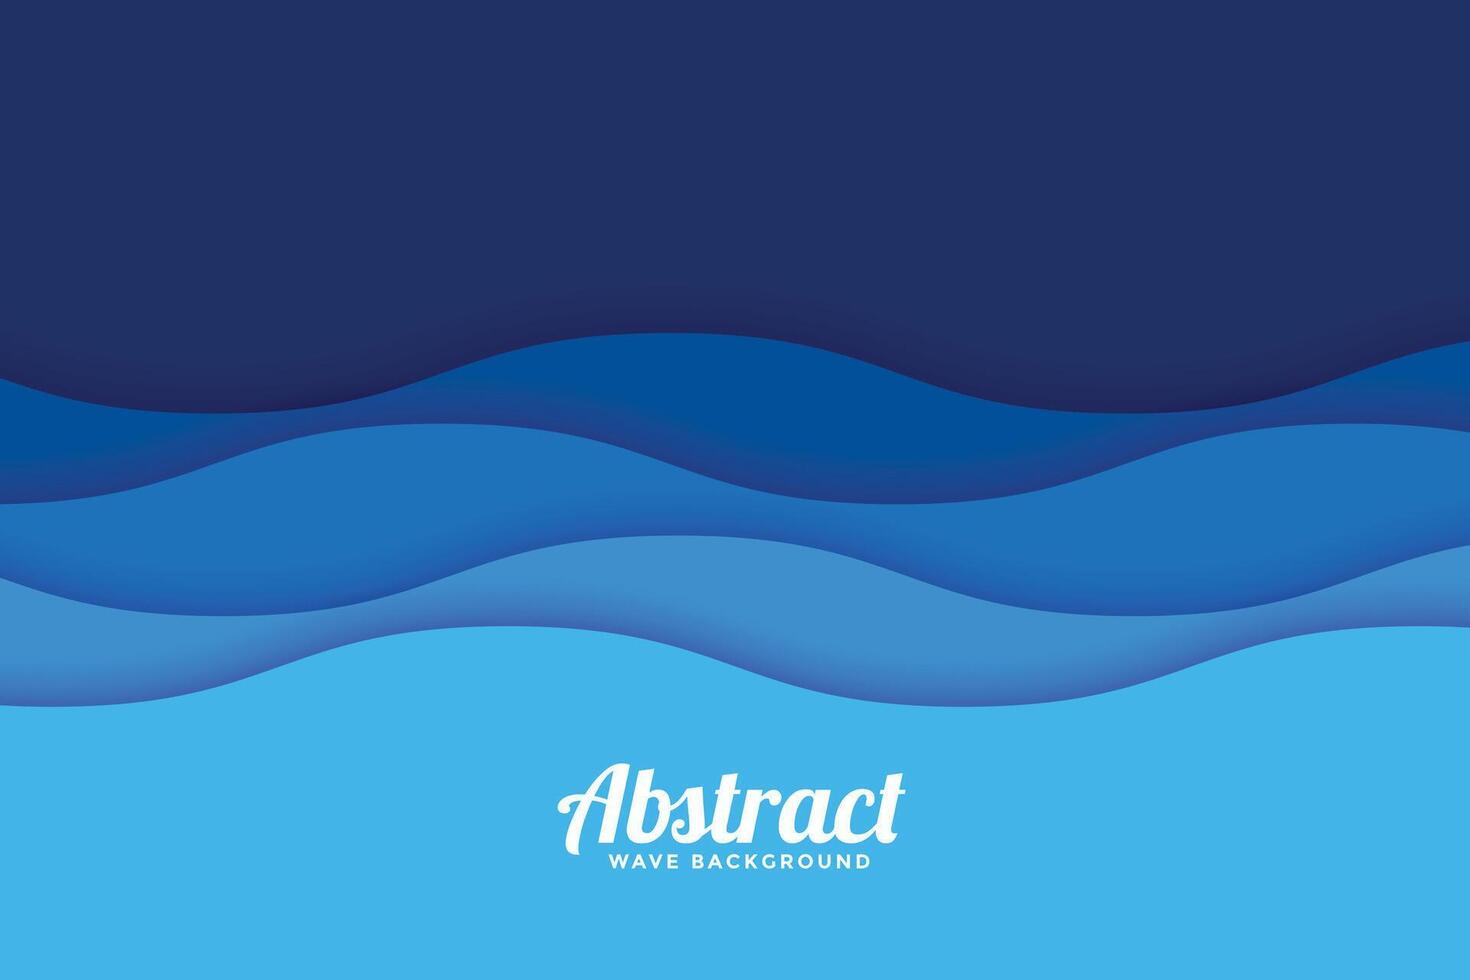 papercut style sea wave pattern background vector